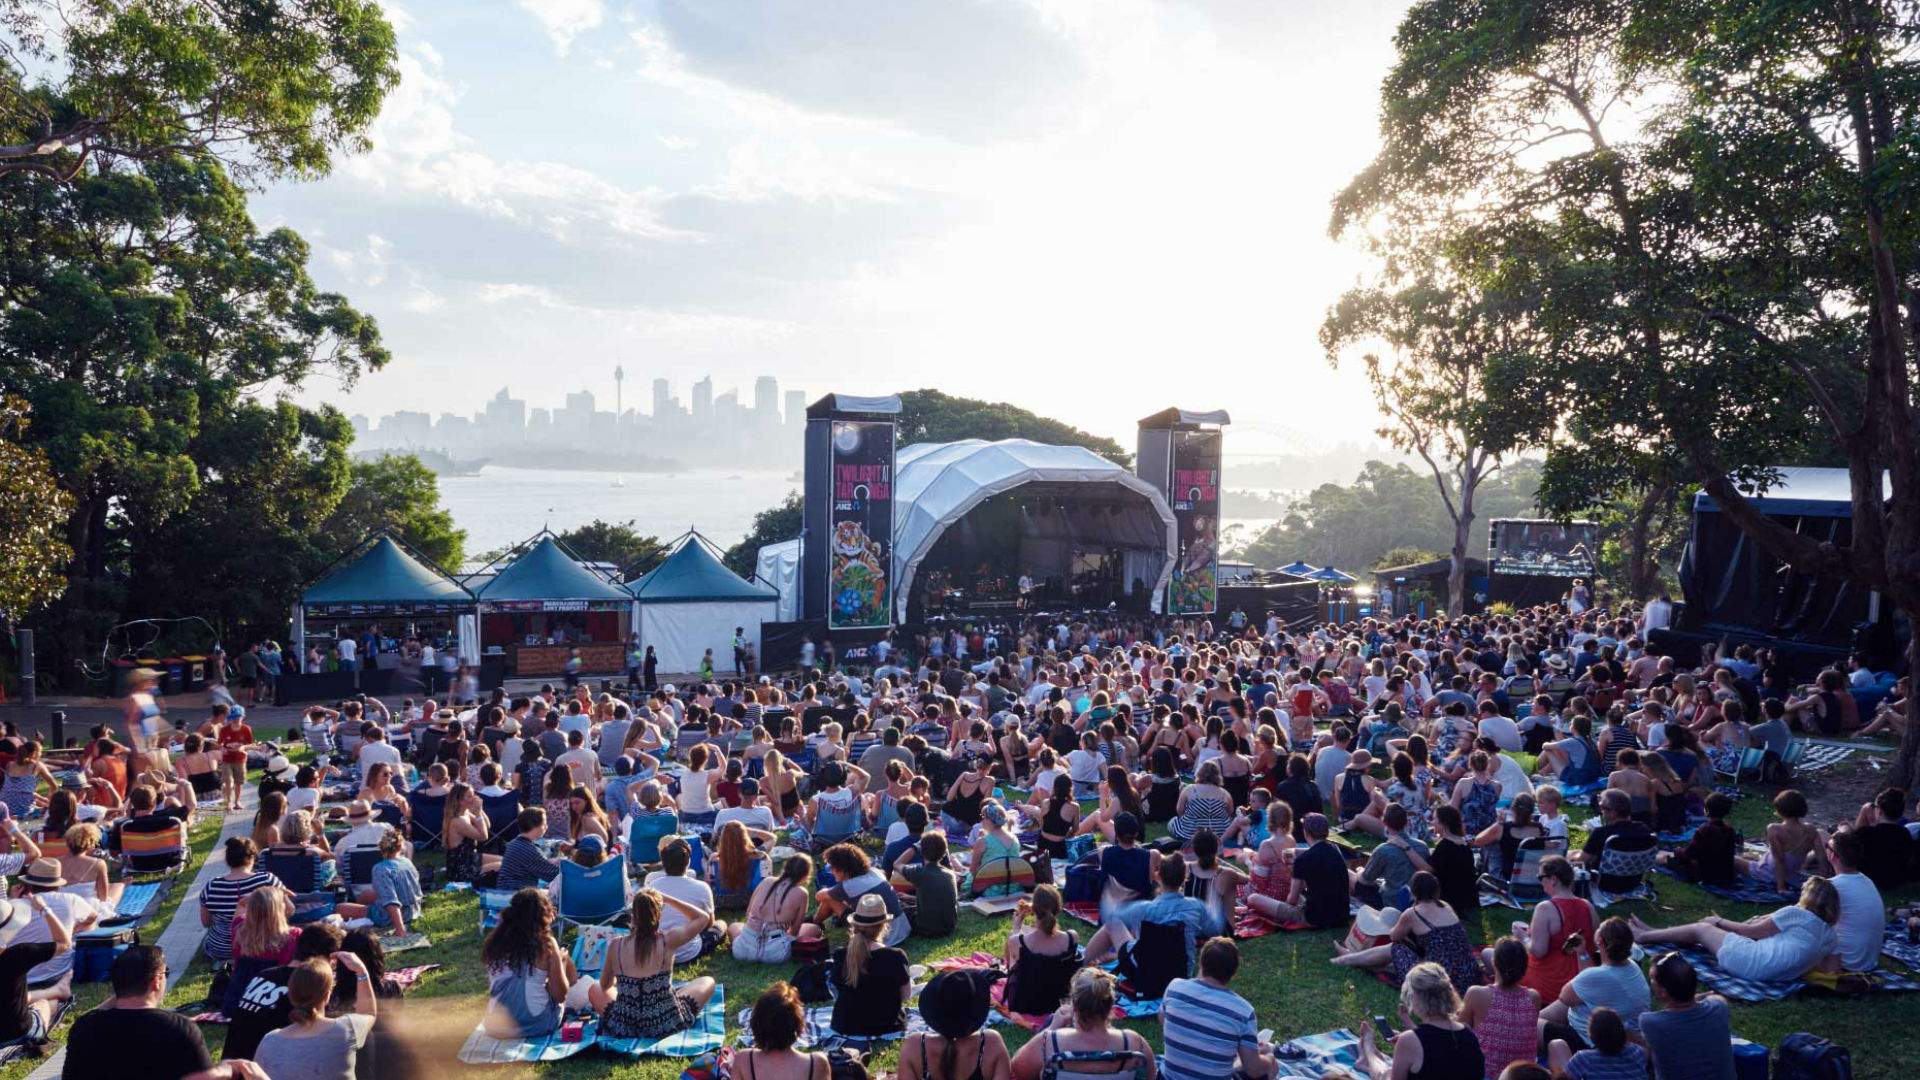 Sydney's Twilight at Taronga Is Back for Another Summer of Music at the Zoo